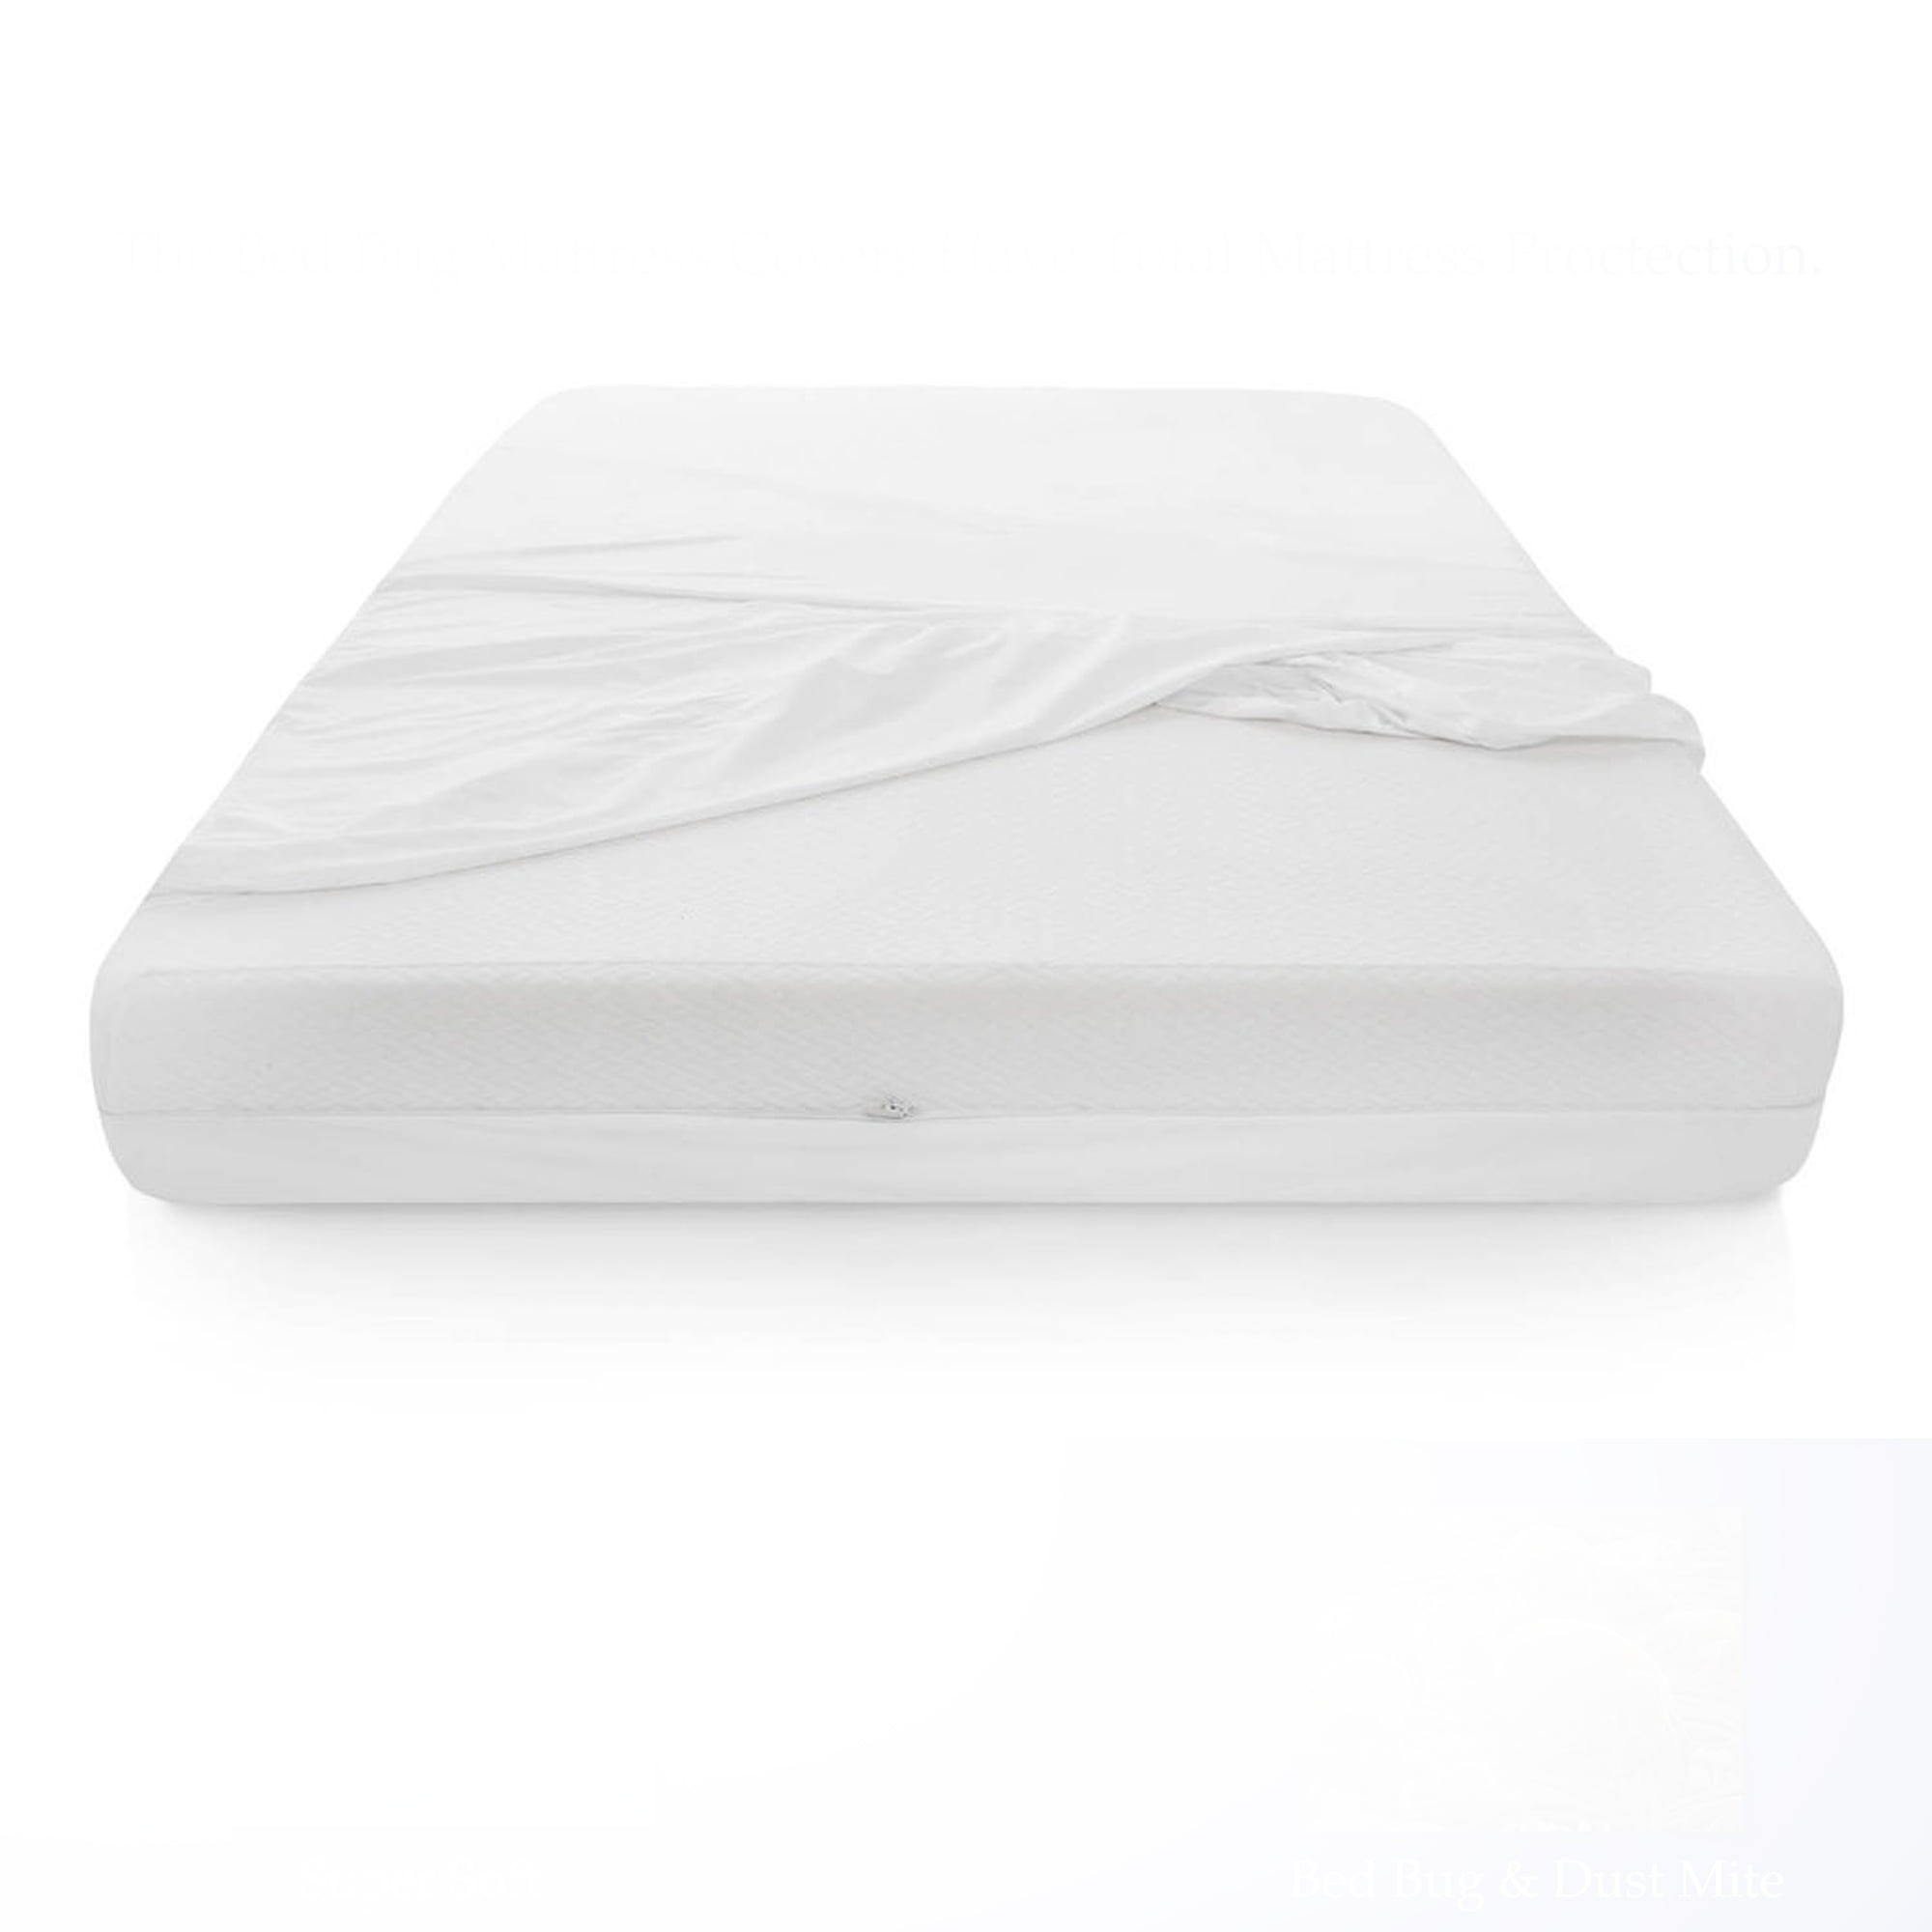 Details about   Waterproof Bed Mattress Topper Cover King Queen Full Twin Anti Bed Bug Allergy 